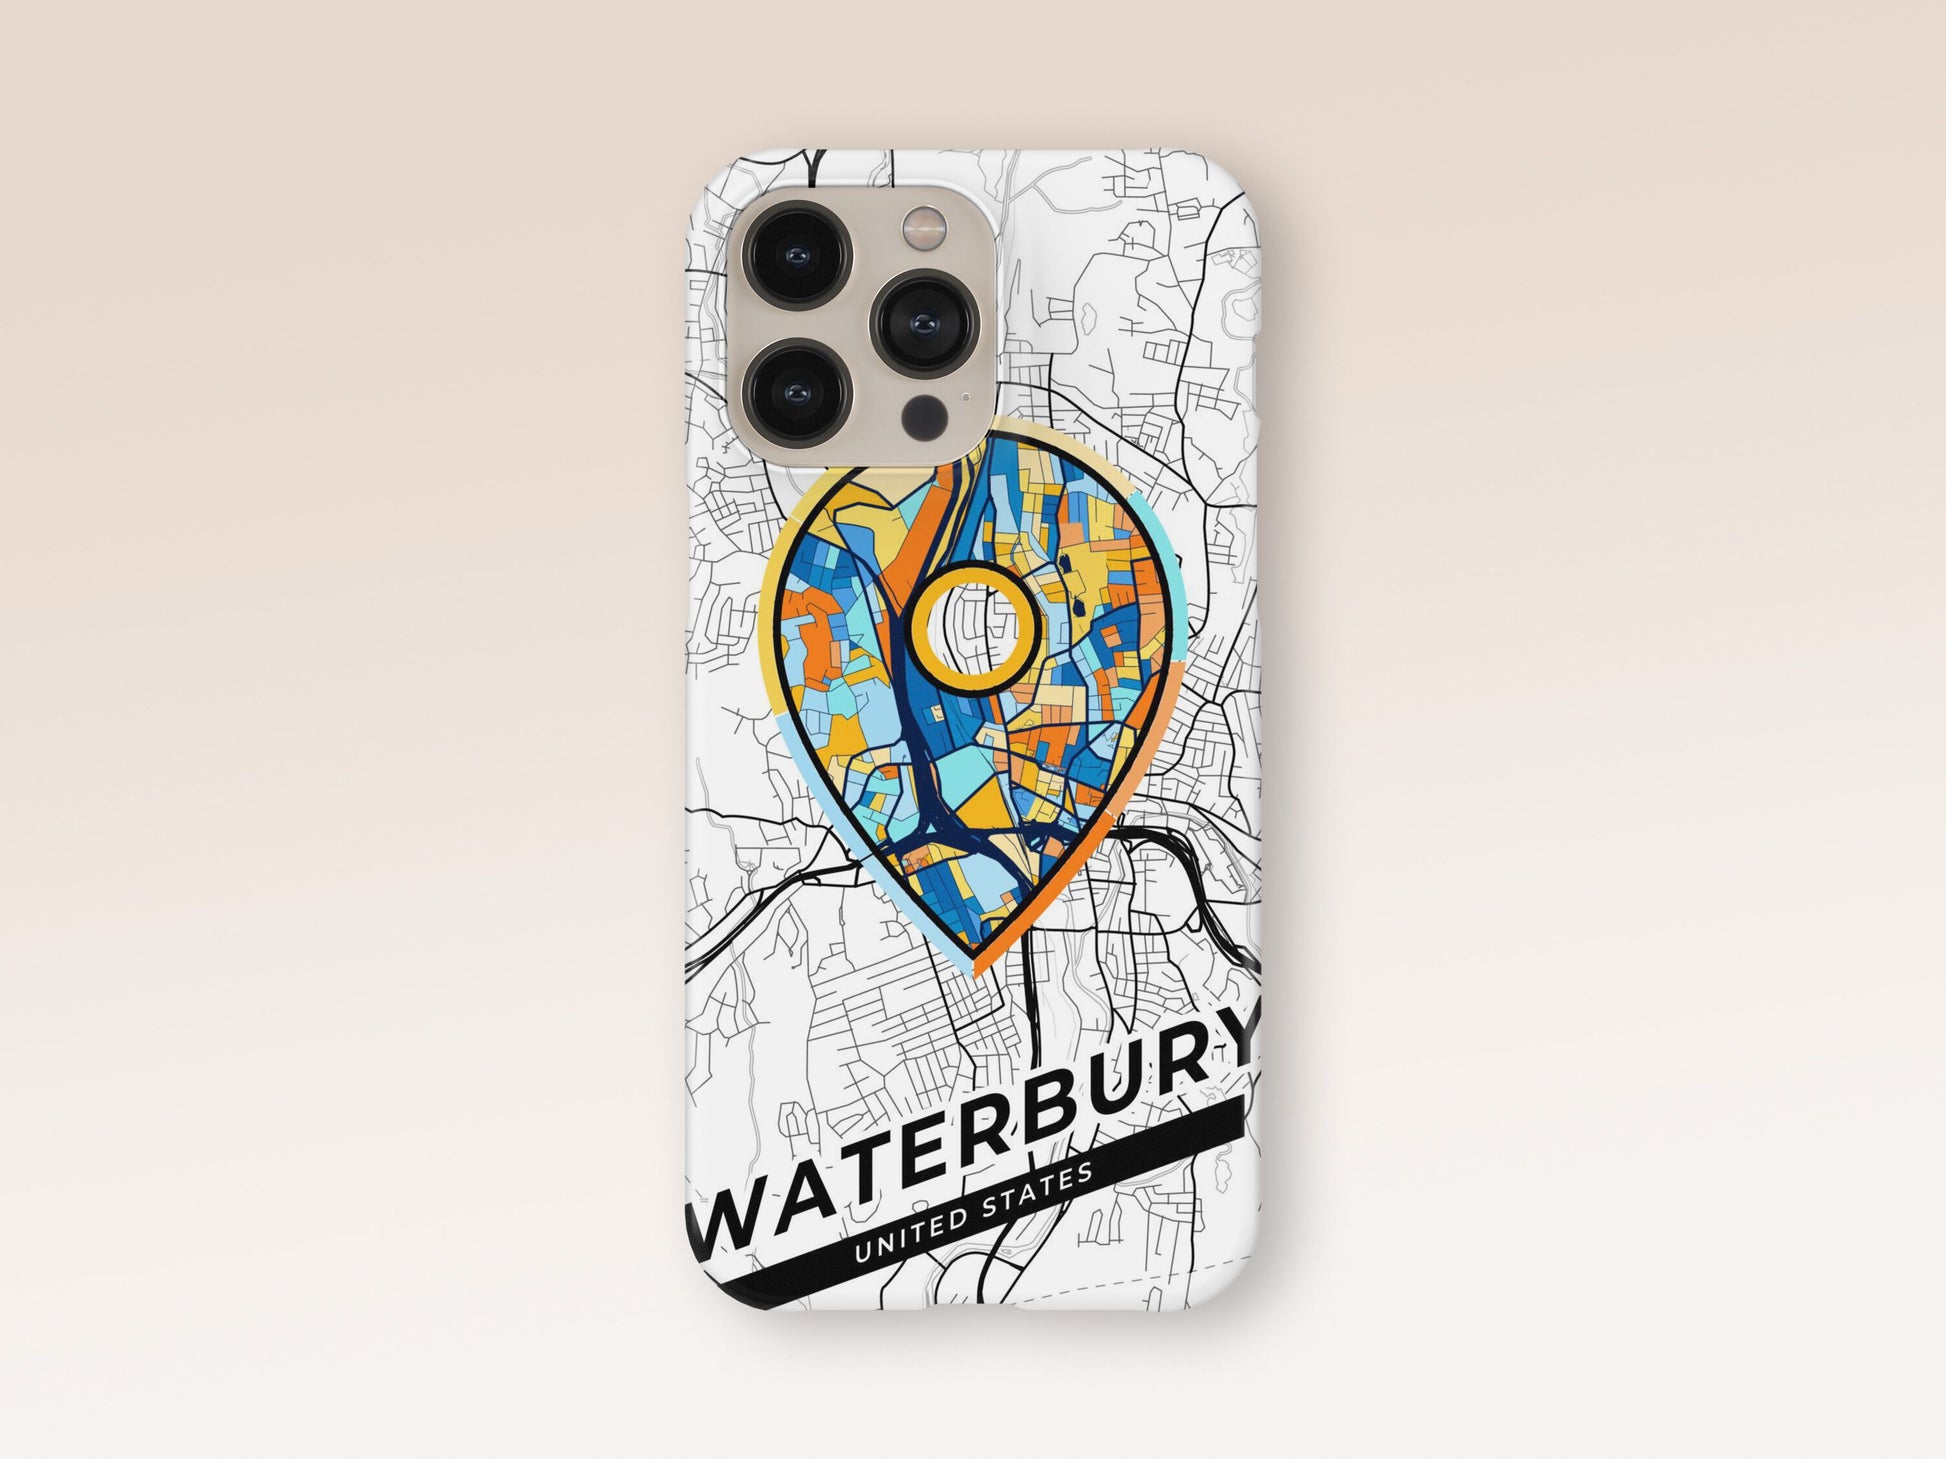 Waterbury Connecticut slim phone case with colorful icon 1